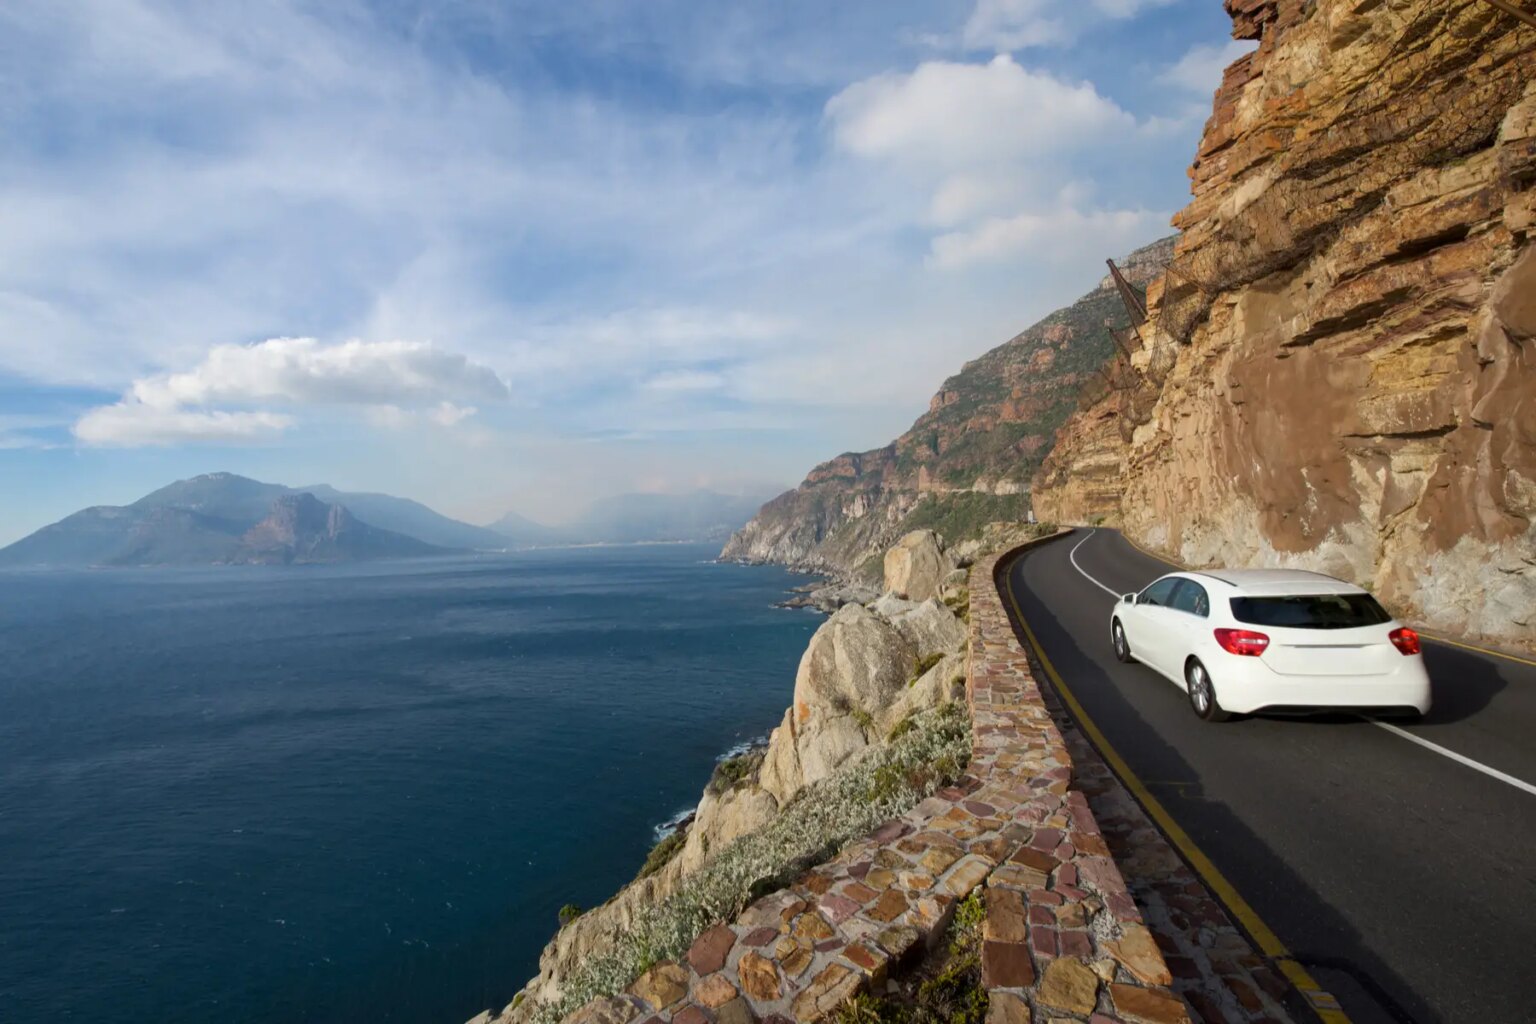 A car drives along Chapmans Peak in South Africa